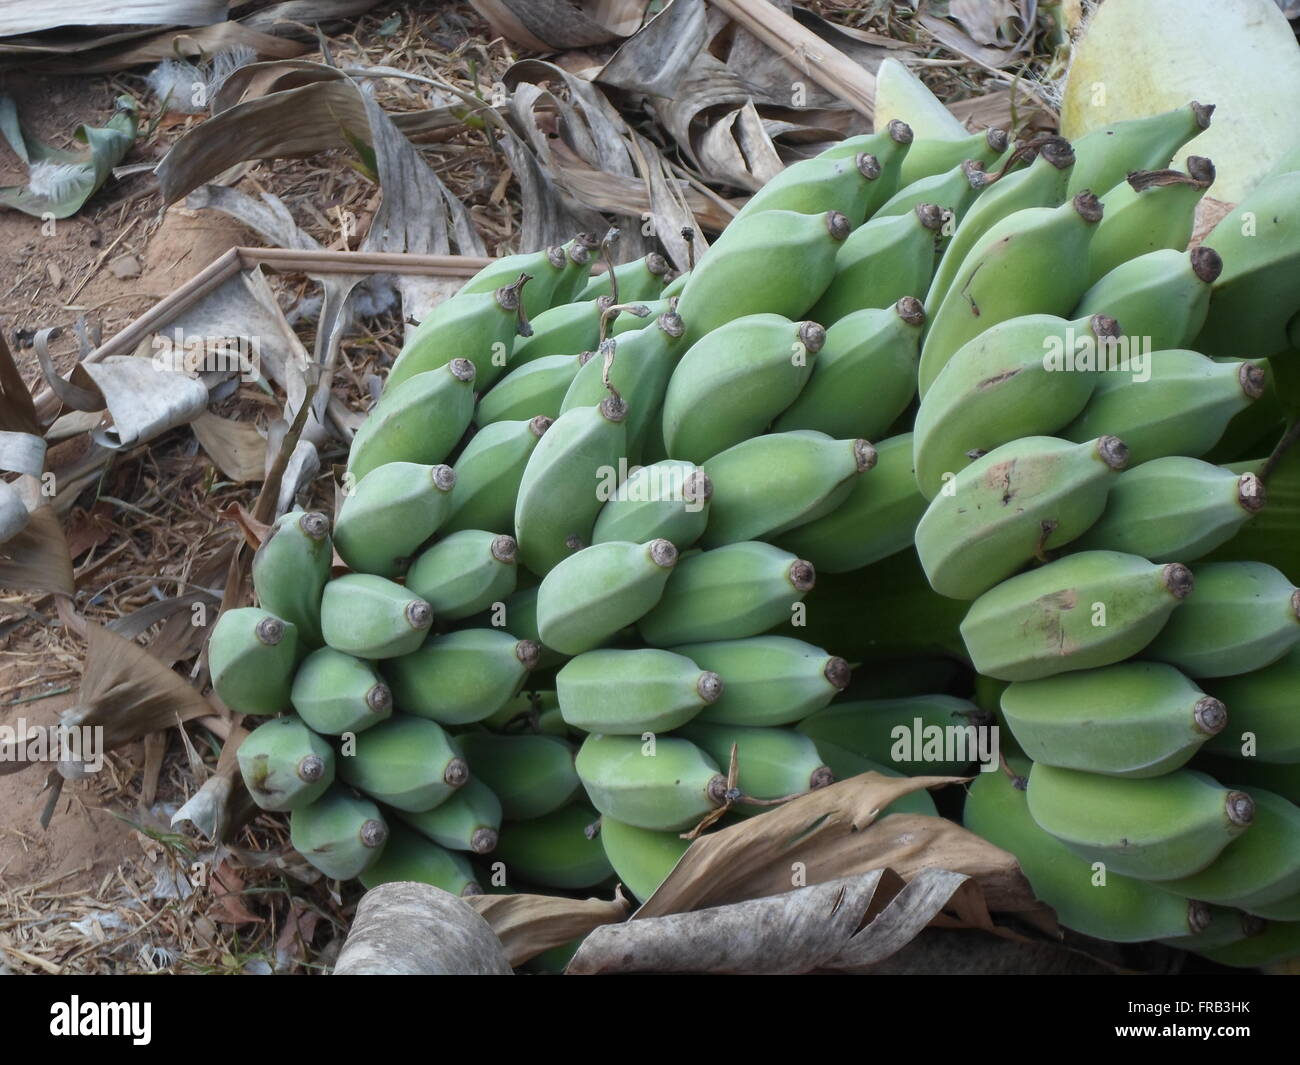 Bananas are the result of immature green banana leaves behind a dry, dark brown. Stock Photo